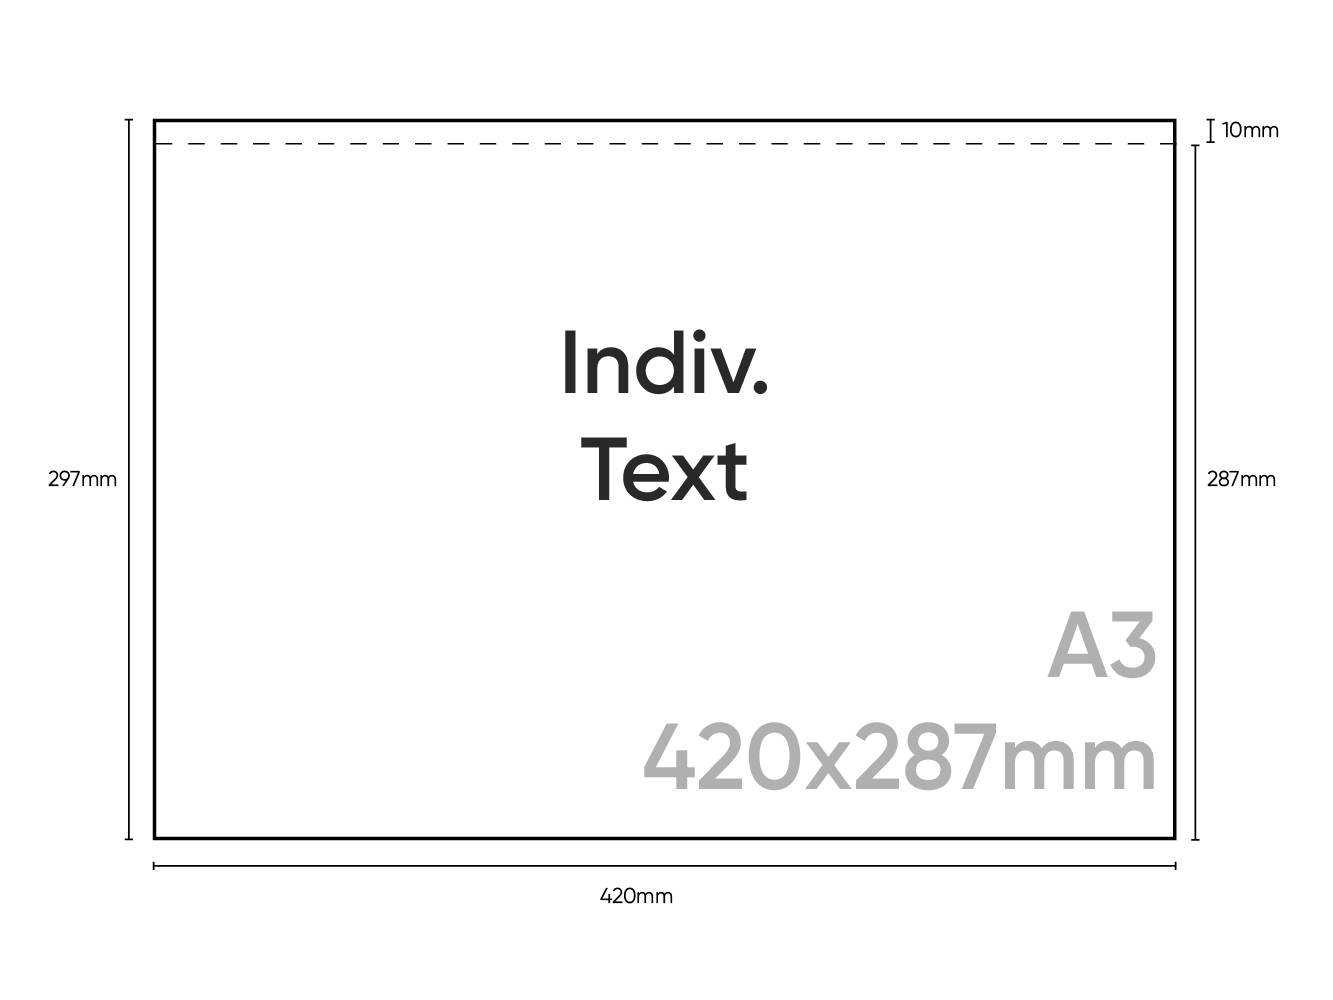 DIN A3, Individualized, 420x297mm, 1 label per sheet